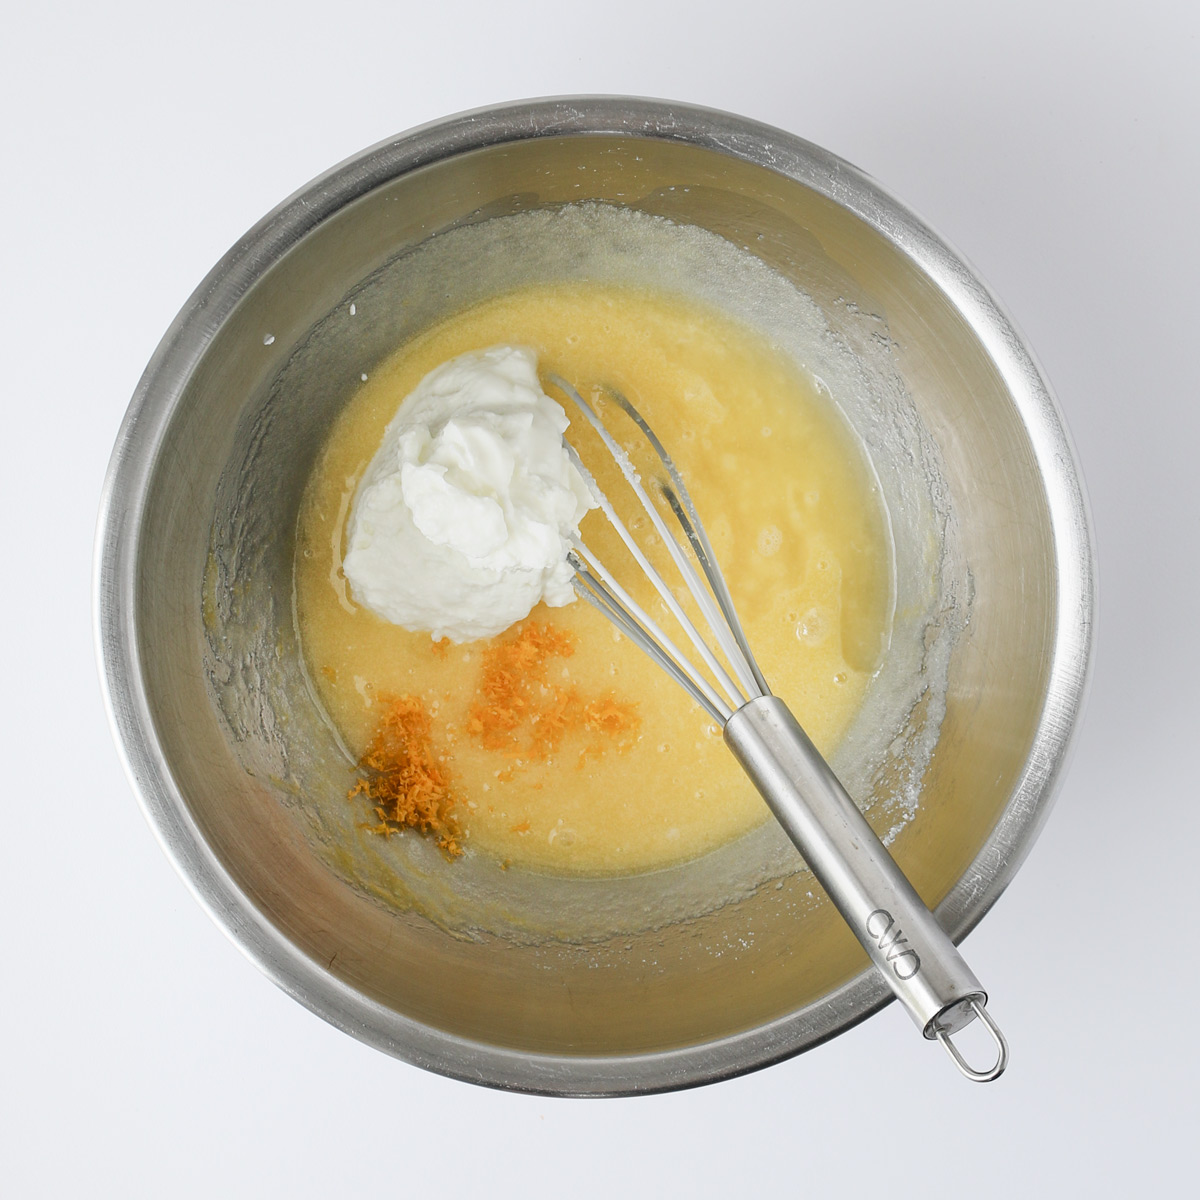 lemon zest and yogurt added to sugar mixture, with whisk, in mixing bowl.